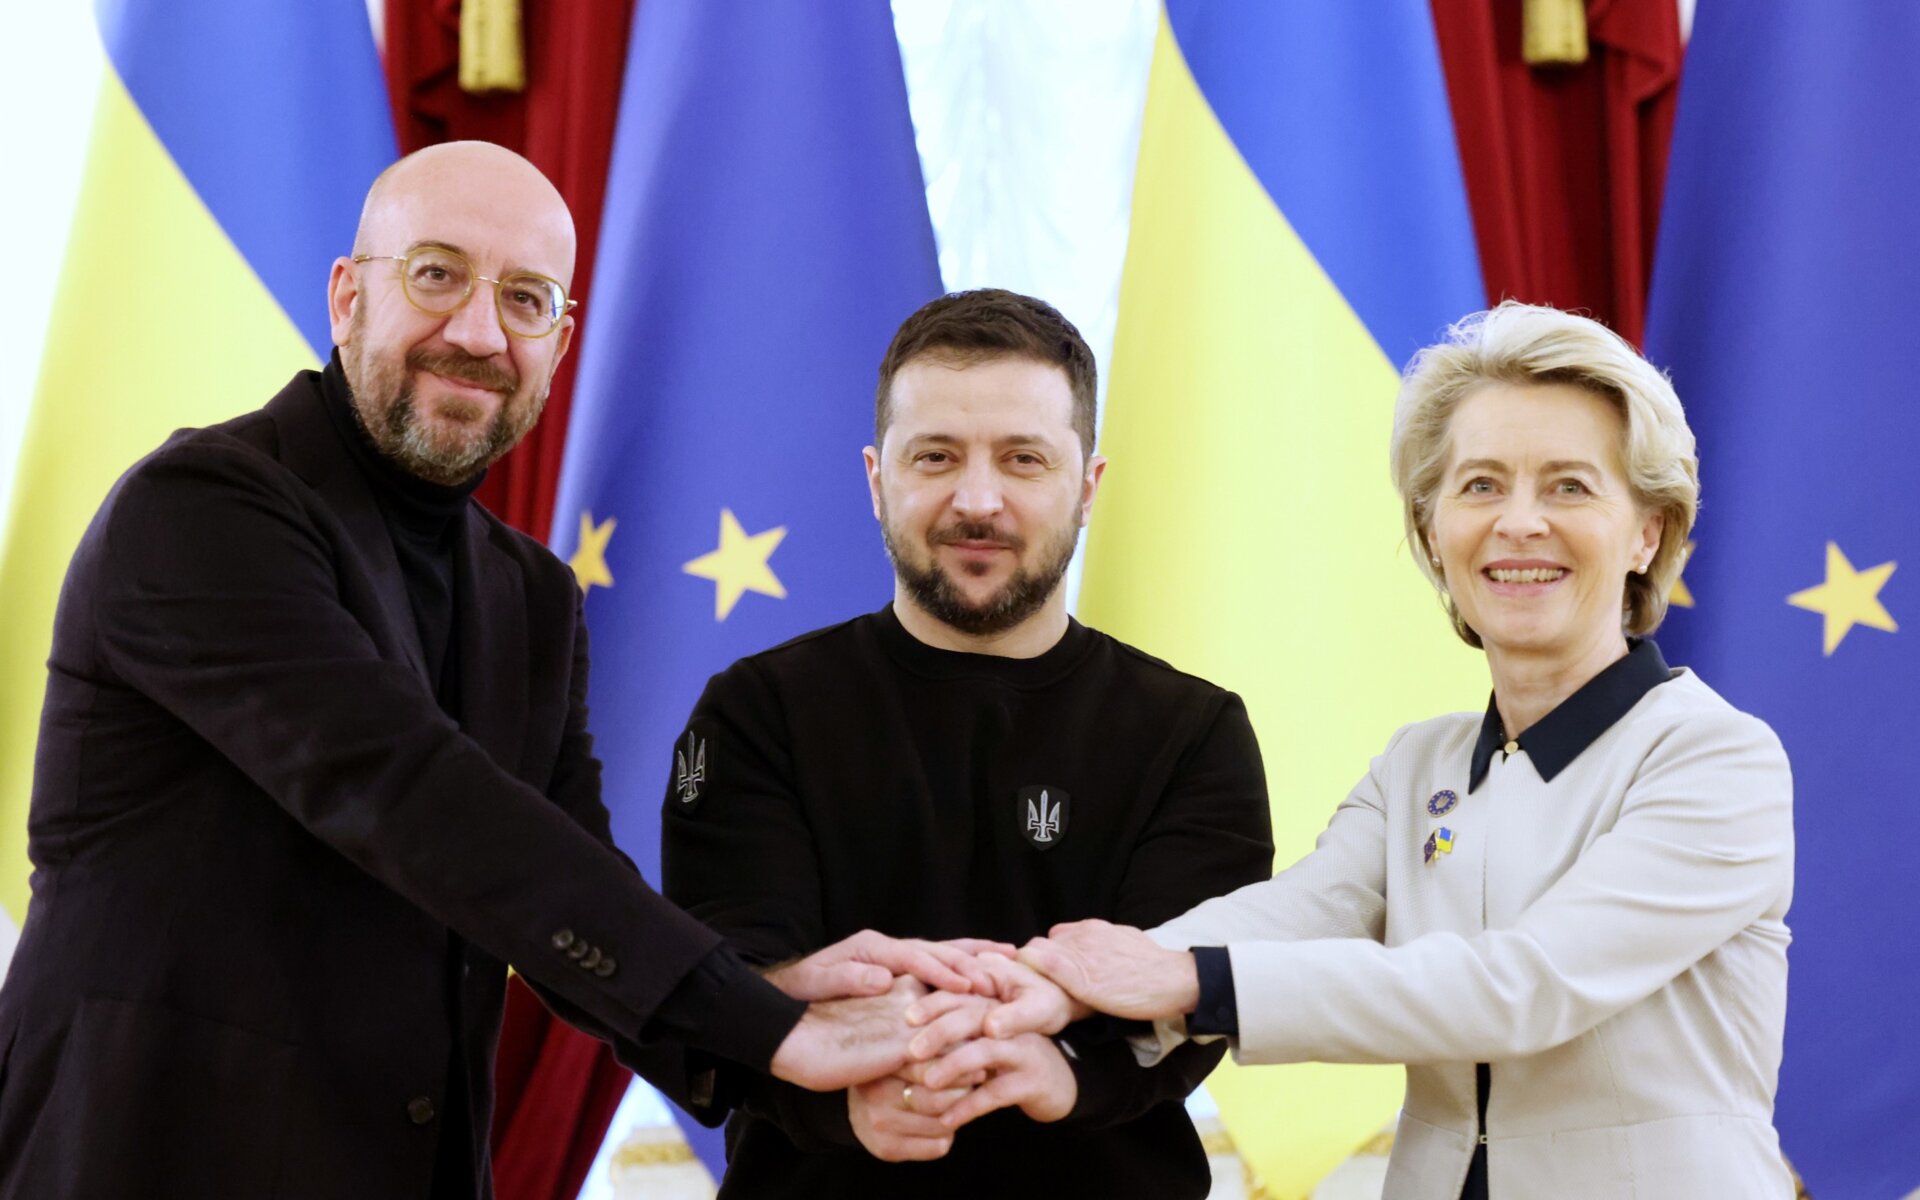 President of the European Council, Charles Michel, with President of Ukraine, Volodymyr Zelenskyy, and President of the European Commission, Ursula Von Der Leyen with flags of the EU and Ukraine in the background.